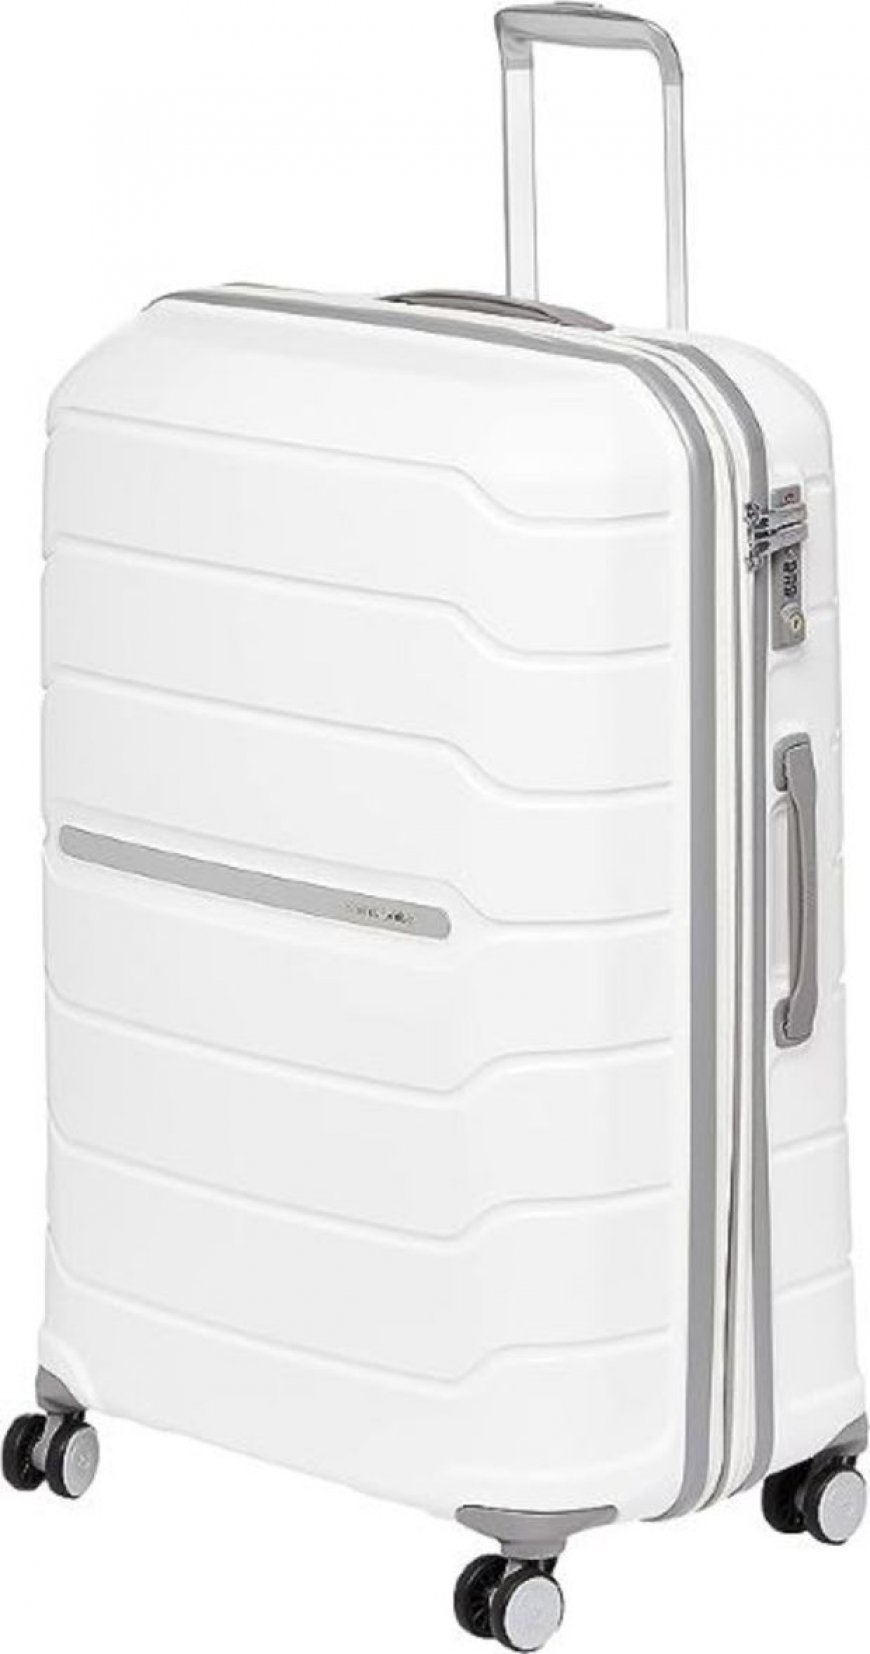 A Samsonite suitcase with 10,000 ratings ‘holds so much stuff,’ and is $108 off at Amazon